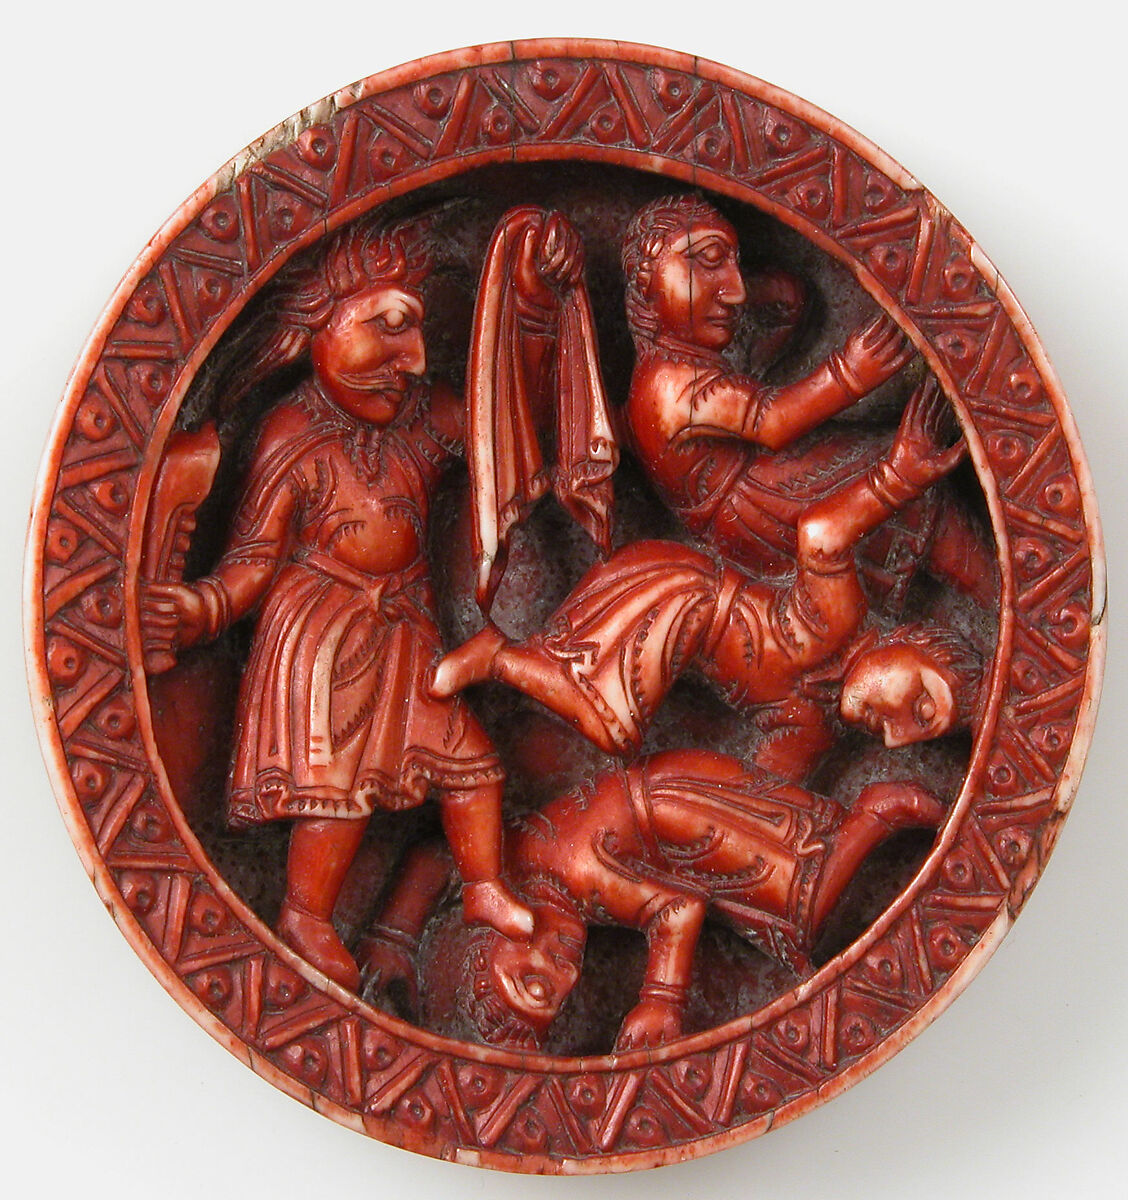 Game Piece with Samson Slaying the Philistines with the Jawbone of an Ass, Elephant ivory, red stain, German 